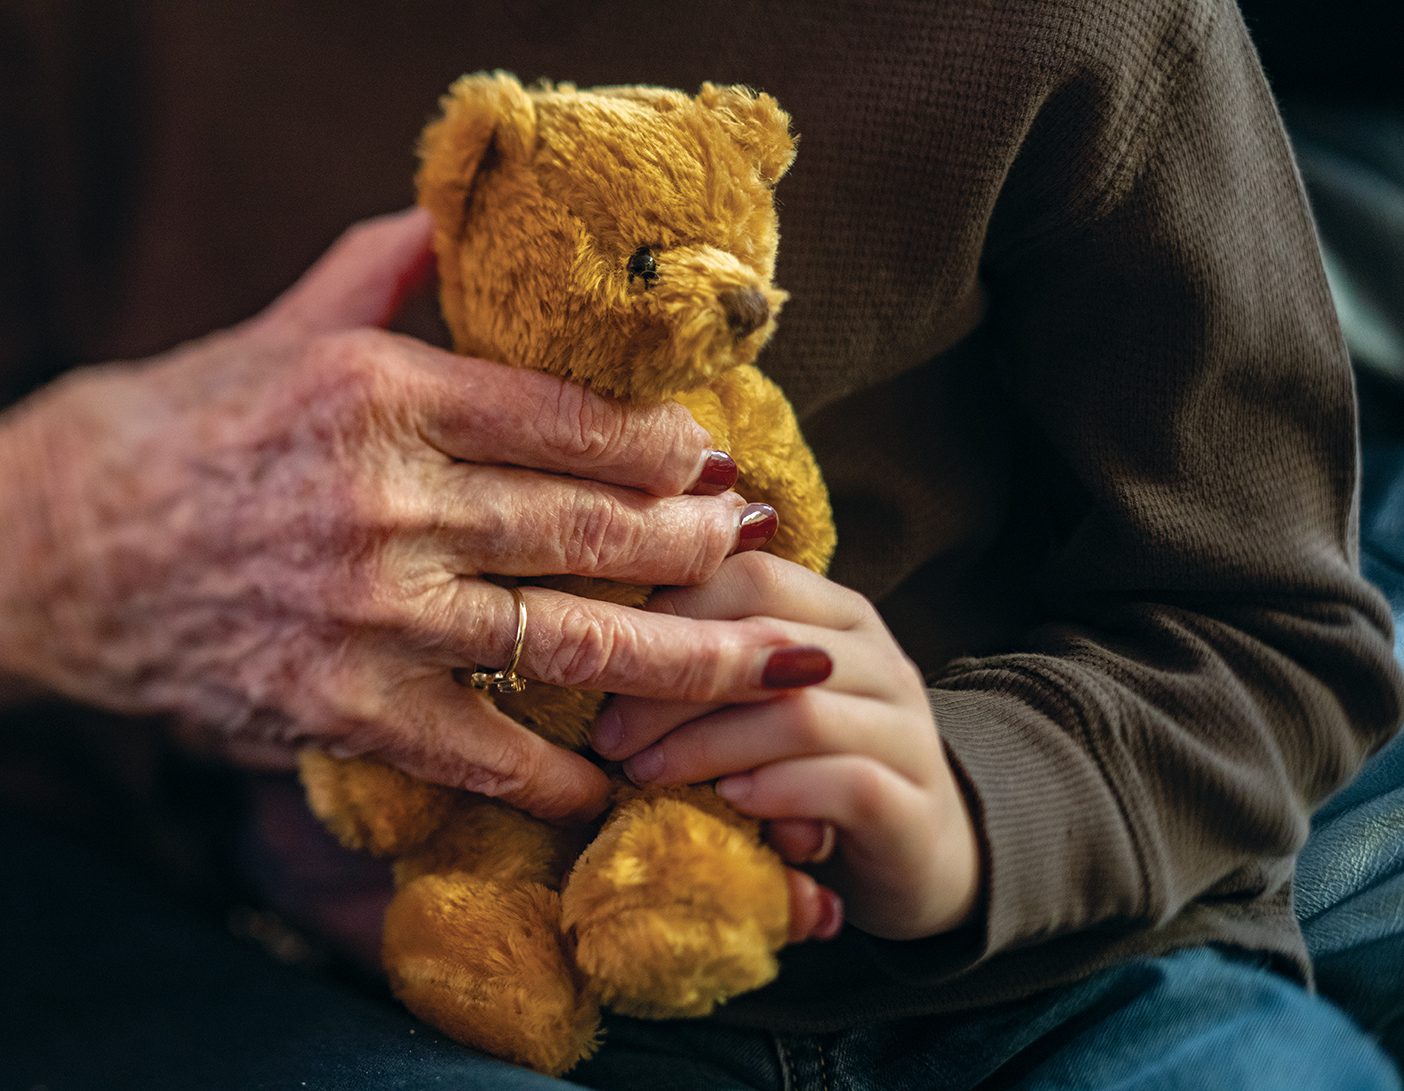 Hands, one young, one old, grasp a golden=brown teddy bear.